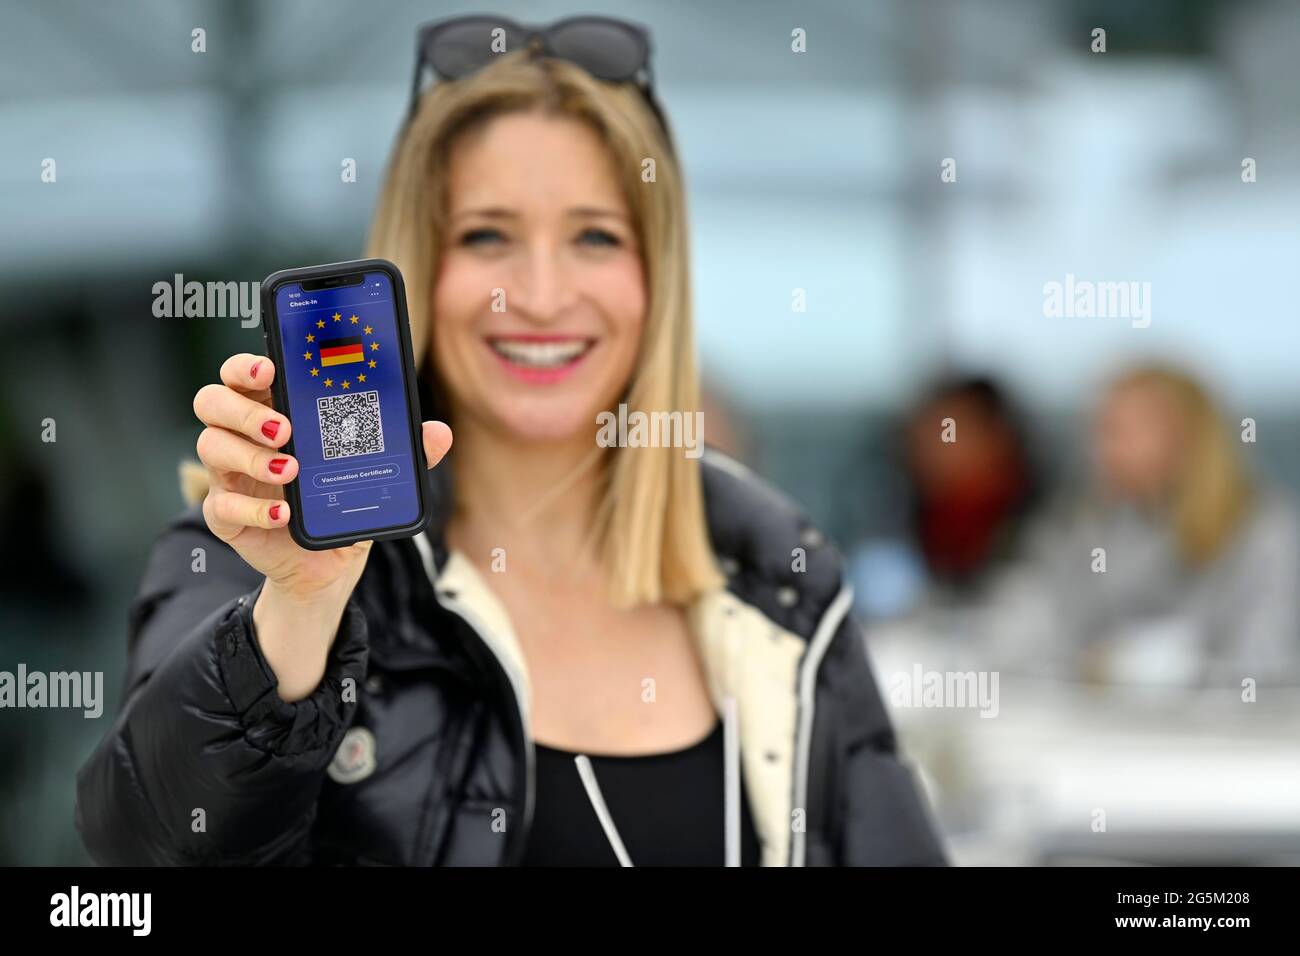 Symbol photo vaccination privilege, smiling woman shows smartphone with digital European vaccination certificate for German citizens, with QR code, Co Stock Photo